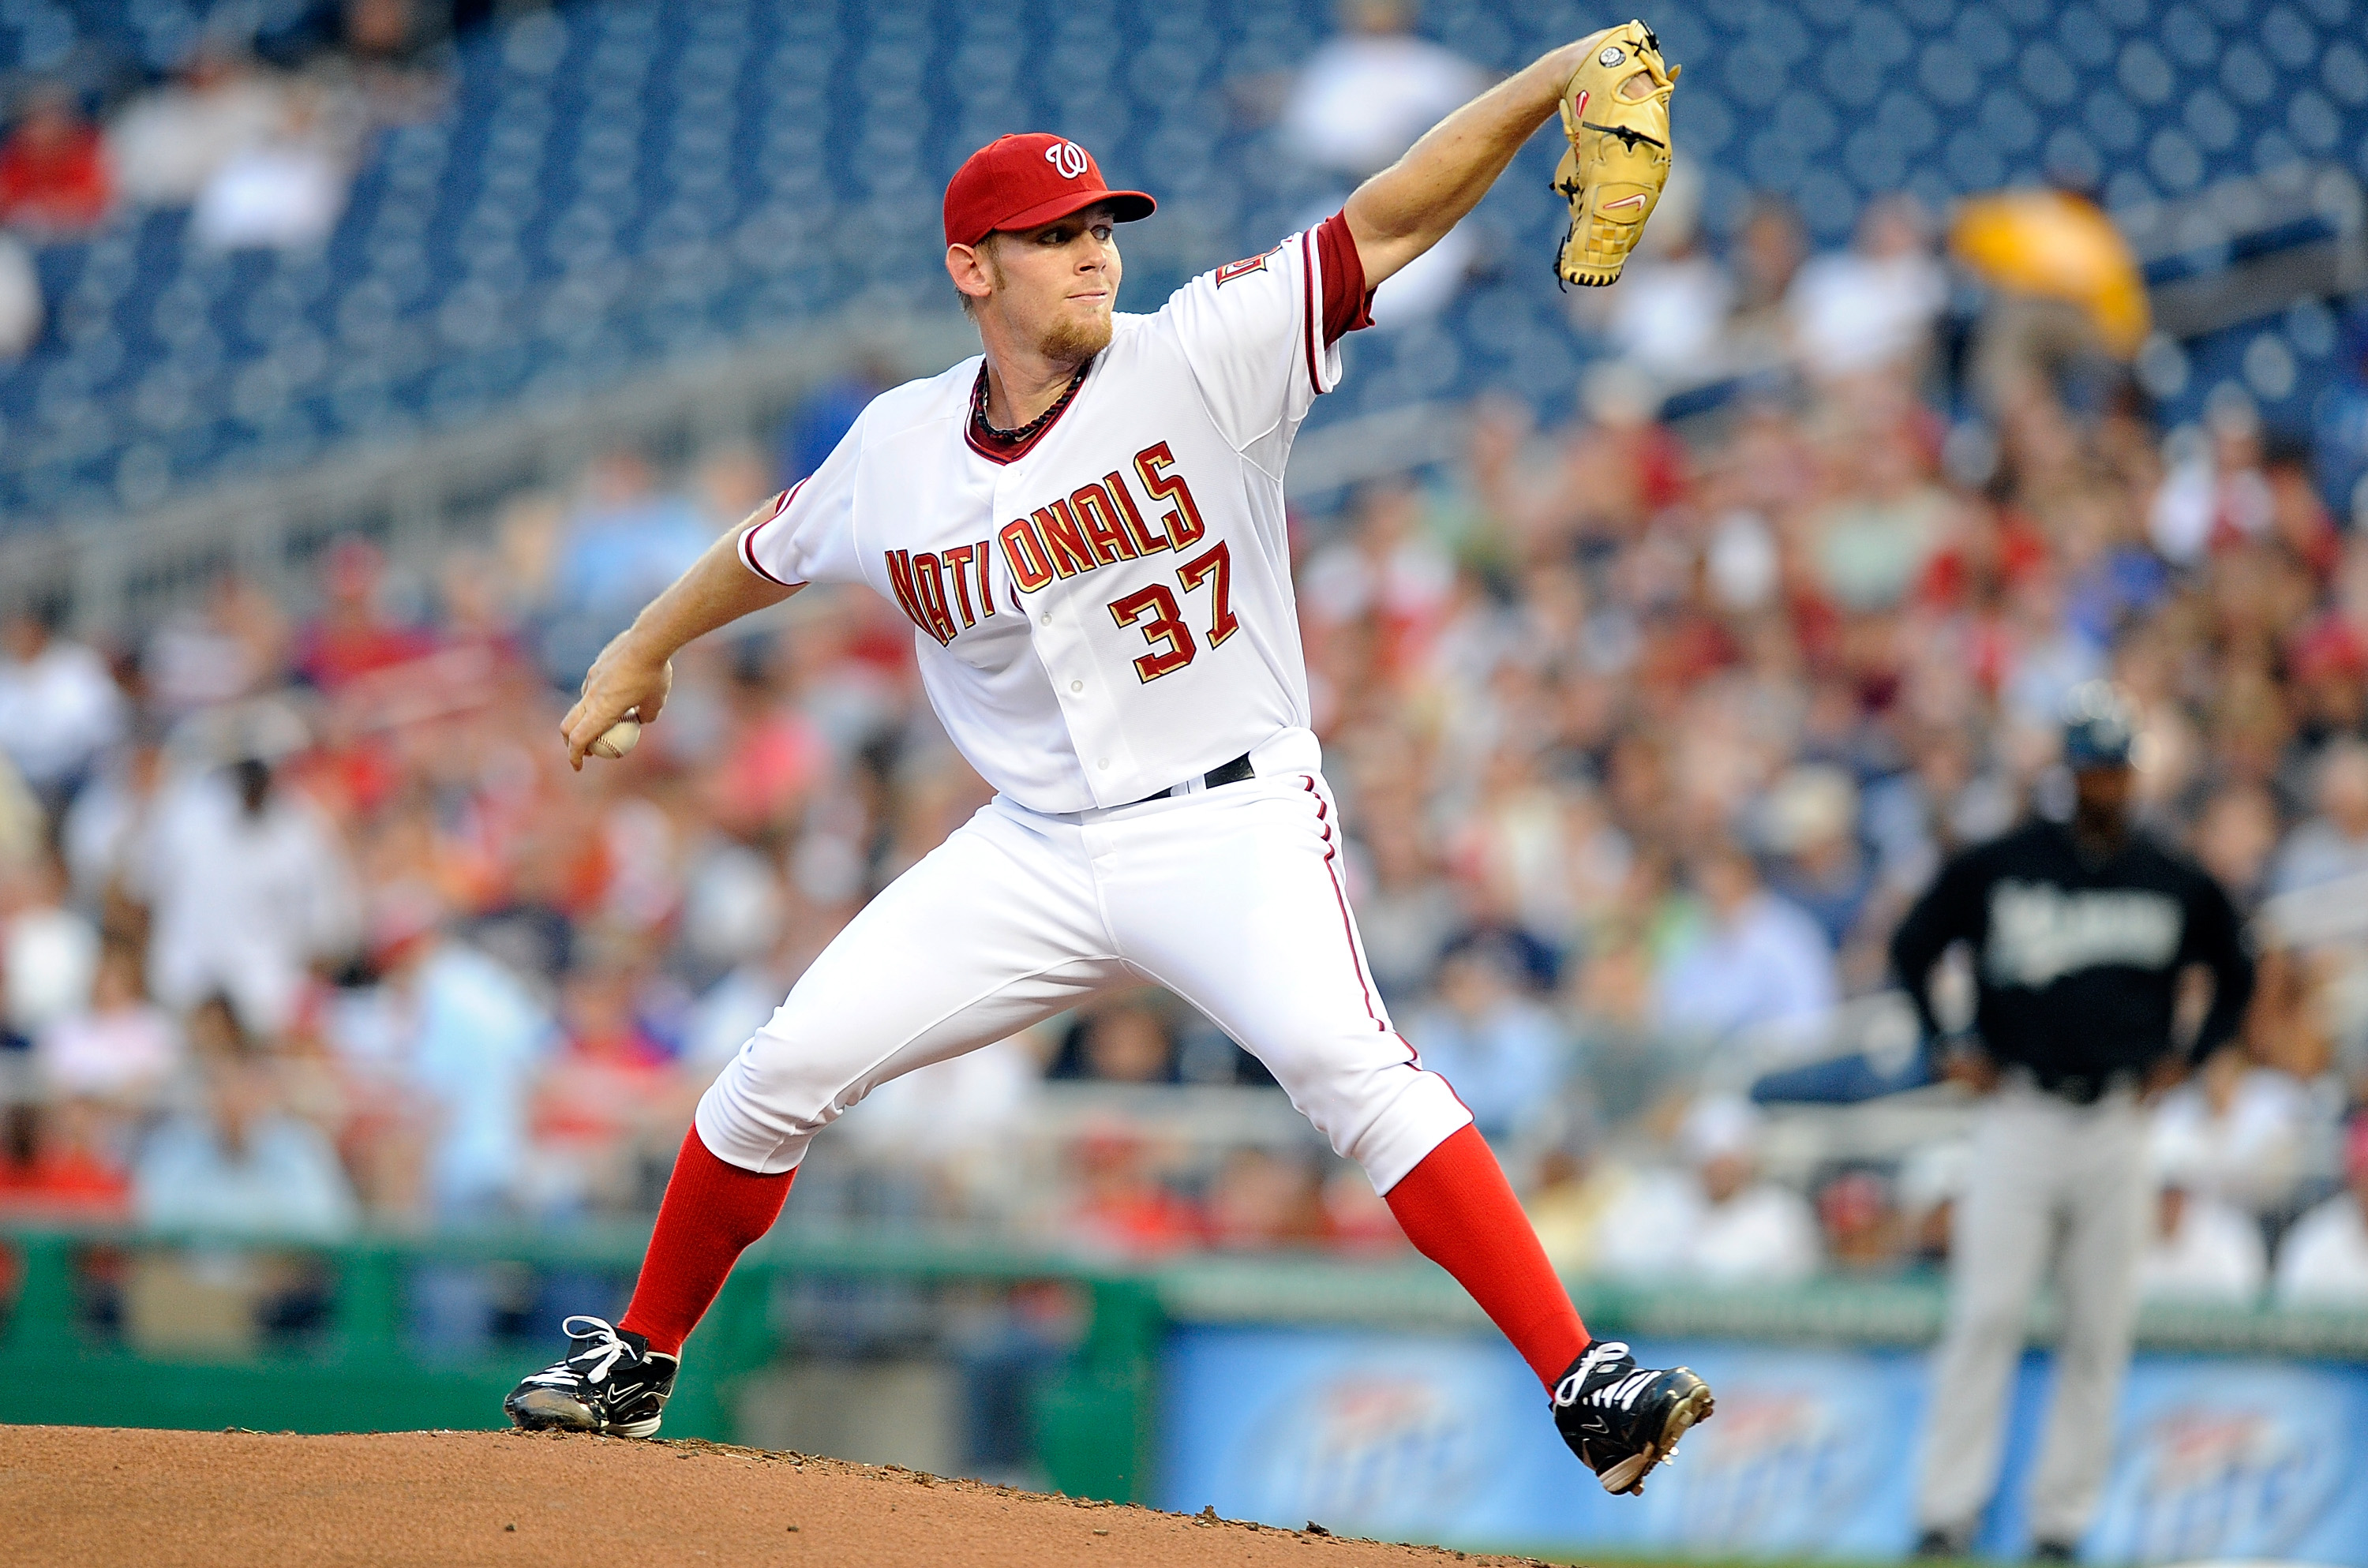 WASHINGTON - AUGUST 10:  Stephen Strasburg #37 of the Washington Nationals pitches against the Florida Marlins at Nationals Park on August 10, 2010 in Washington, DC.  (Photo by Greg Fiume/Getty Images)